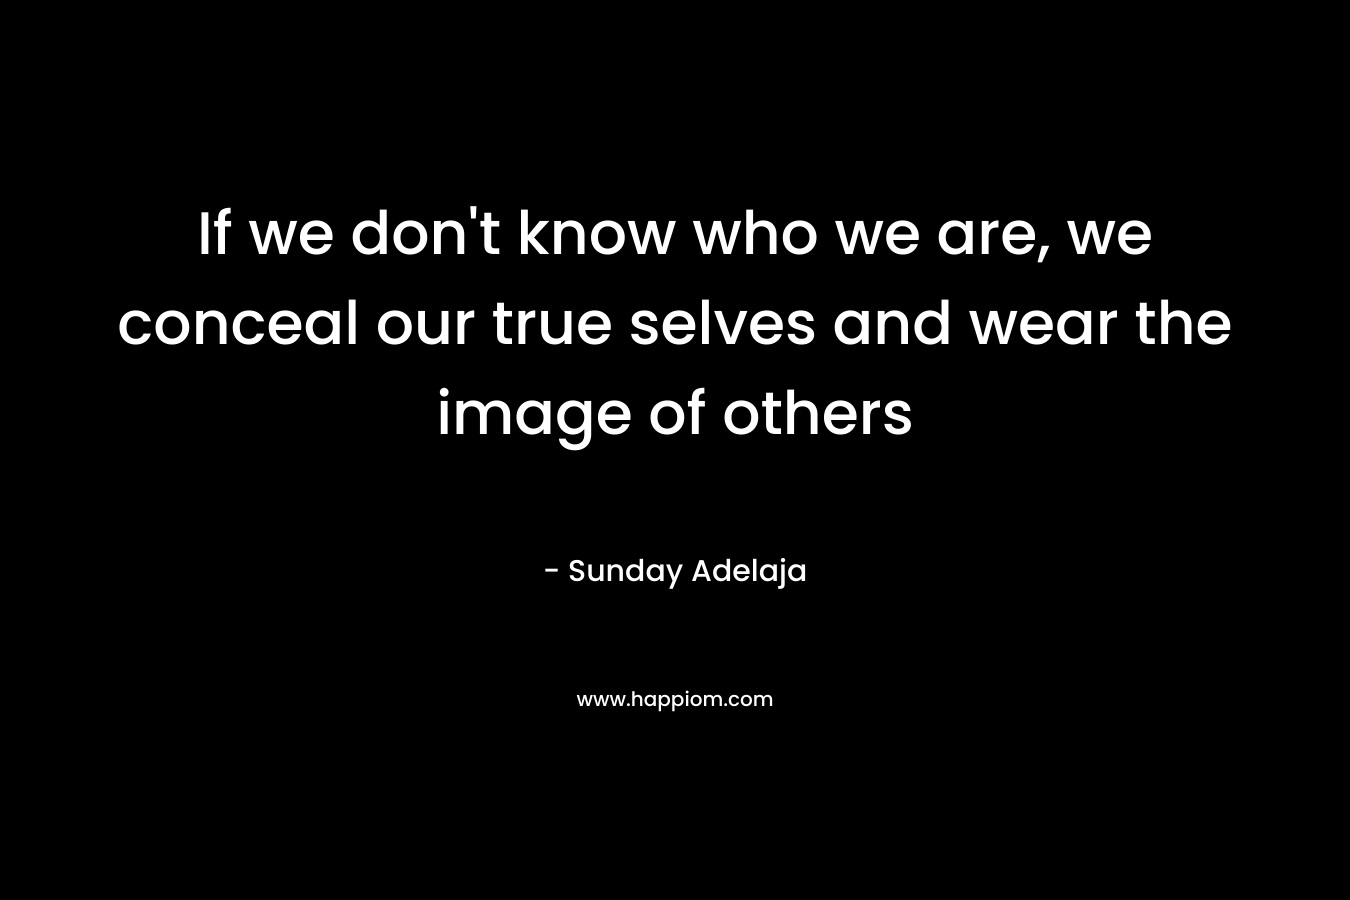 If we don't know who we are, we conceal our true selves and wear the image of others